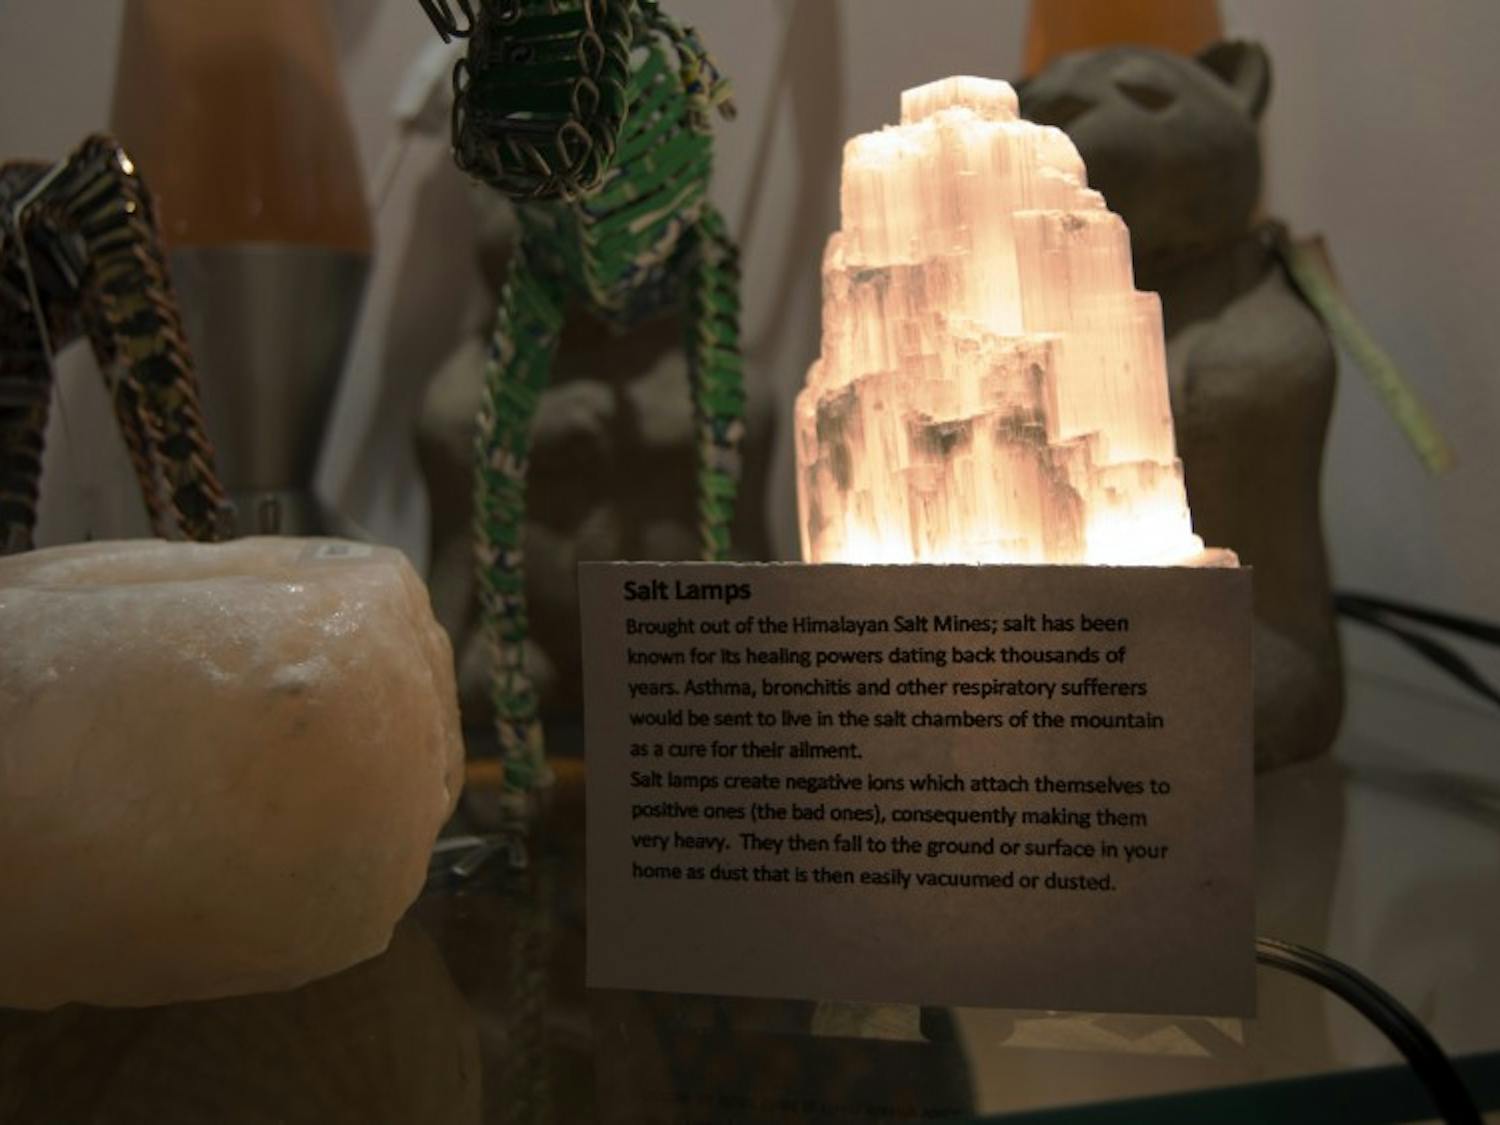 Import House on Court Street sells Himalayan salt lamps, featuring a sign giving a descprition of where the lamps originate and how they are thought to work. 